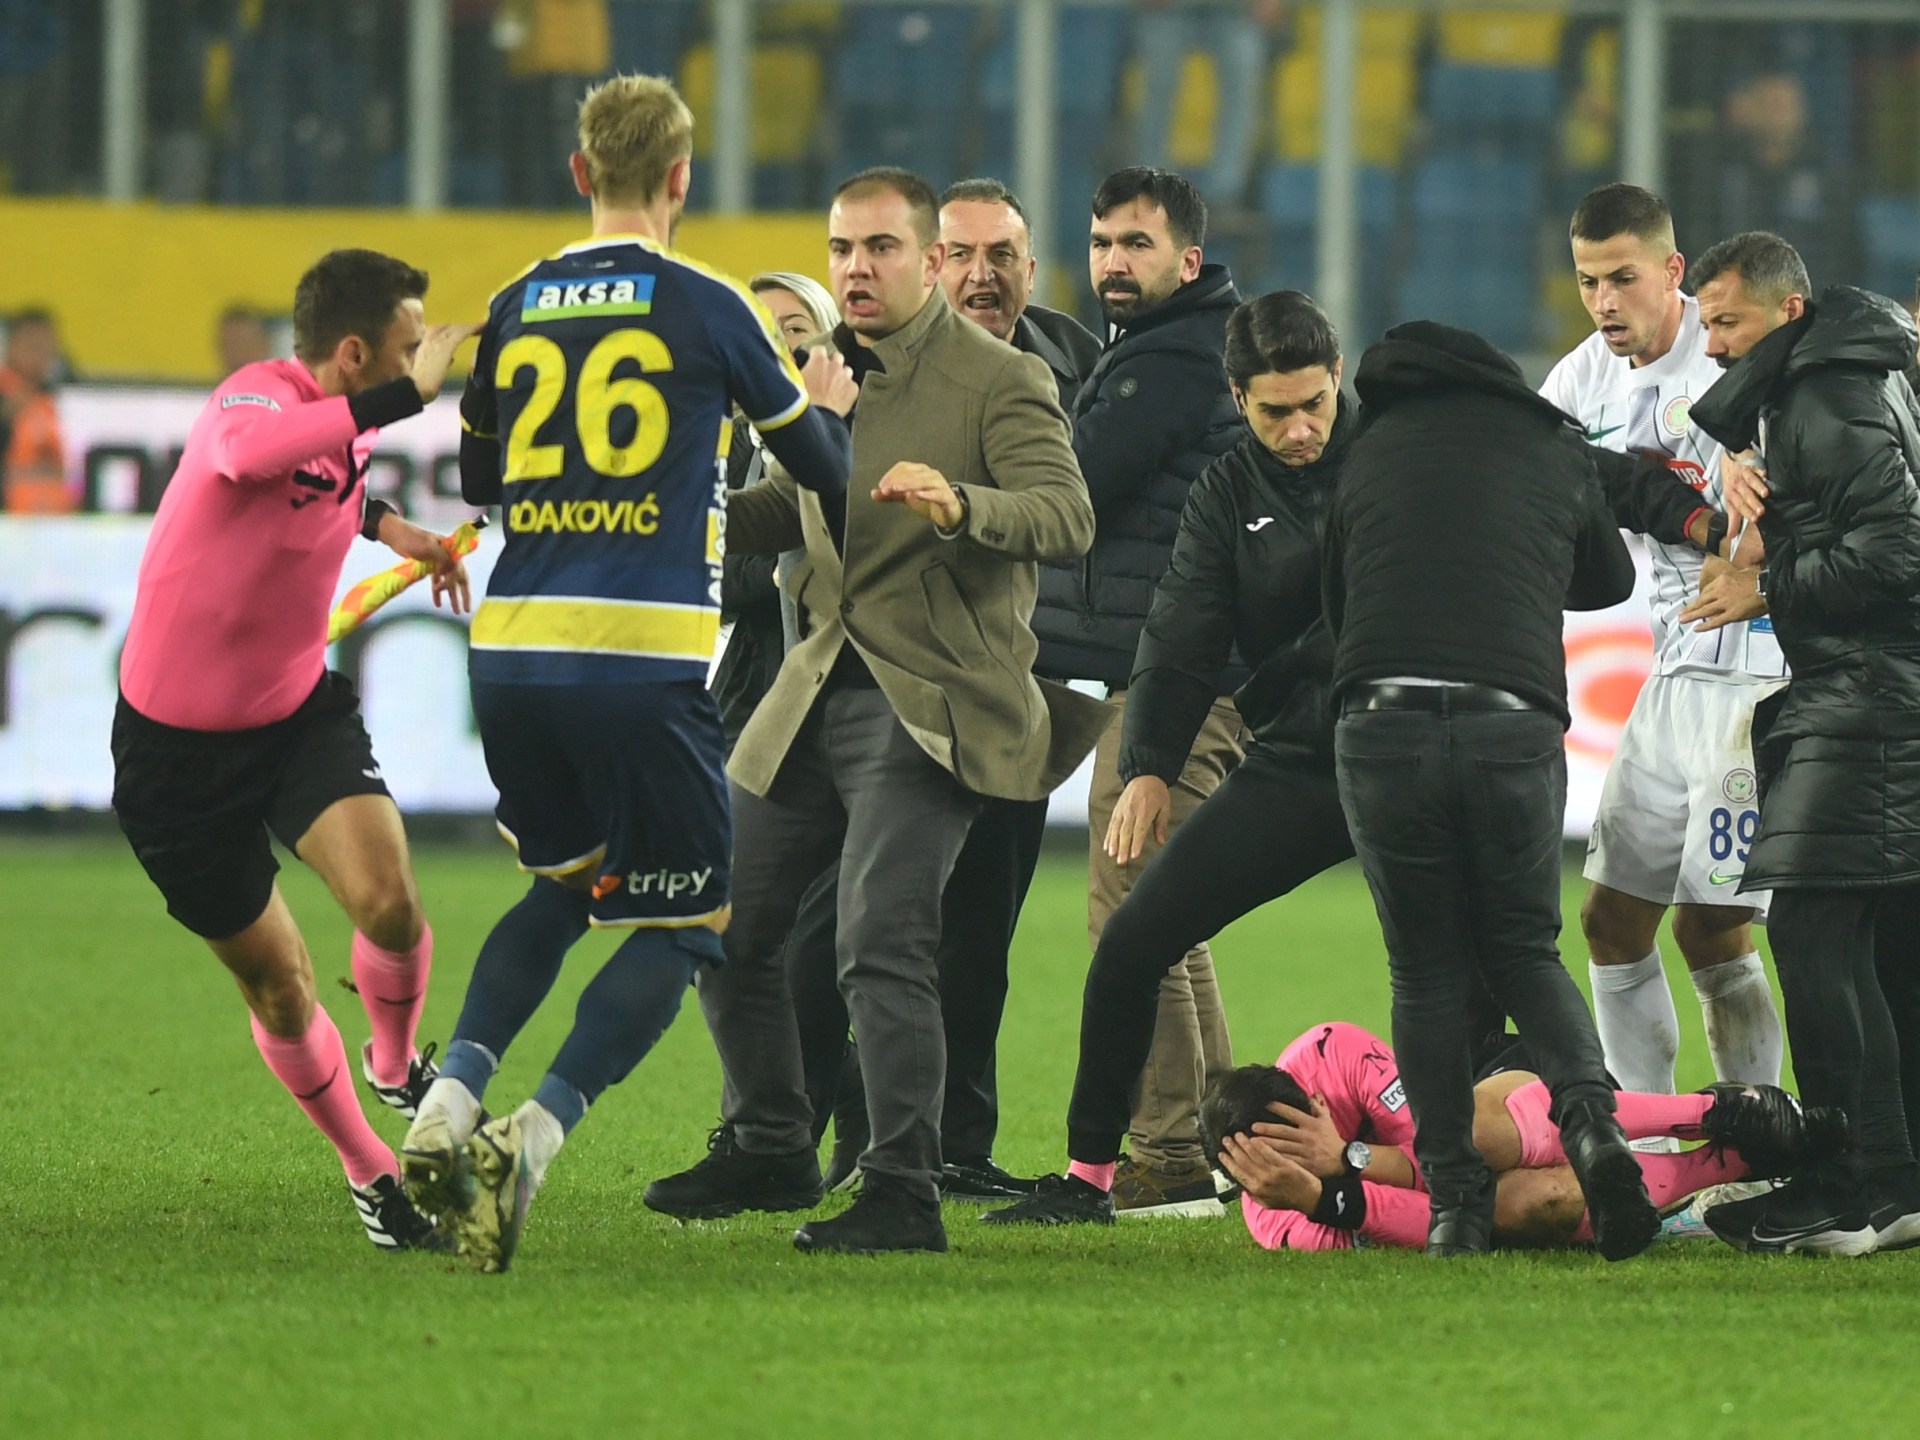 Turkish football leagues halted after club president punches referee | Football News #Turkish #football #leagues #halted #club #president #punches #referee #Football #News